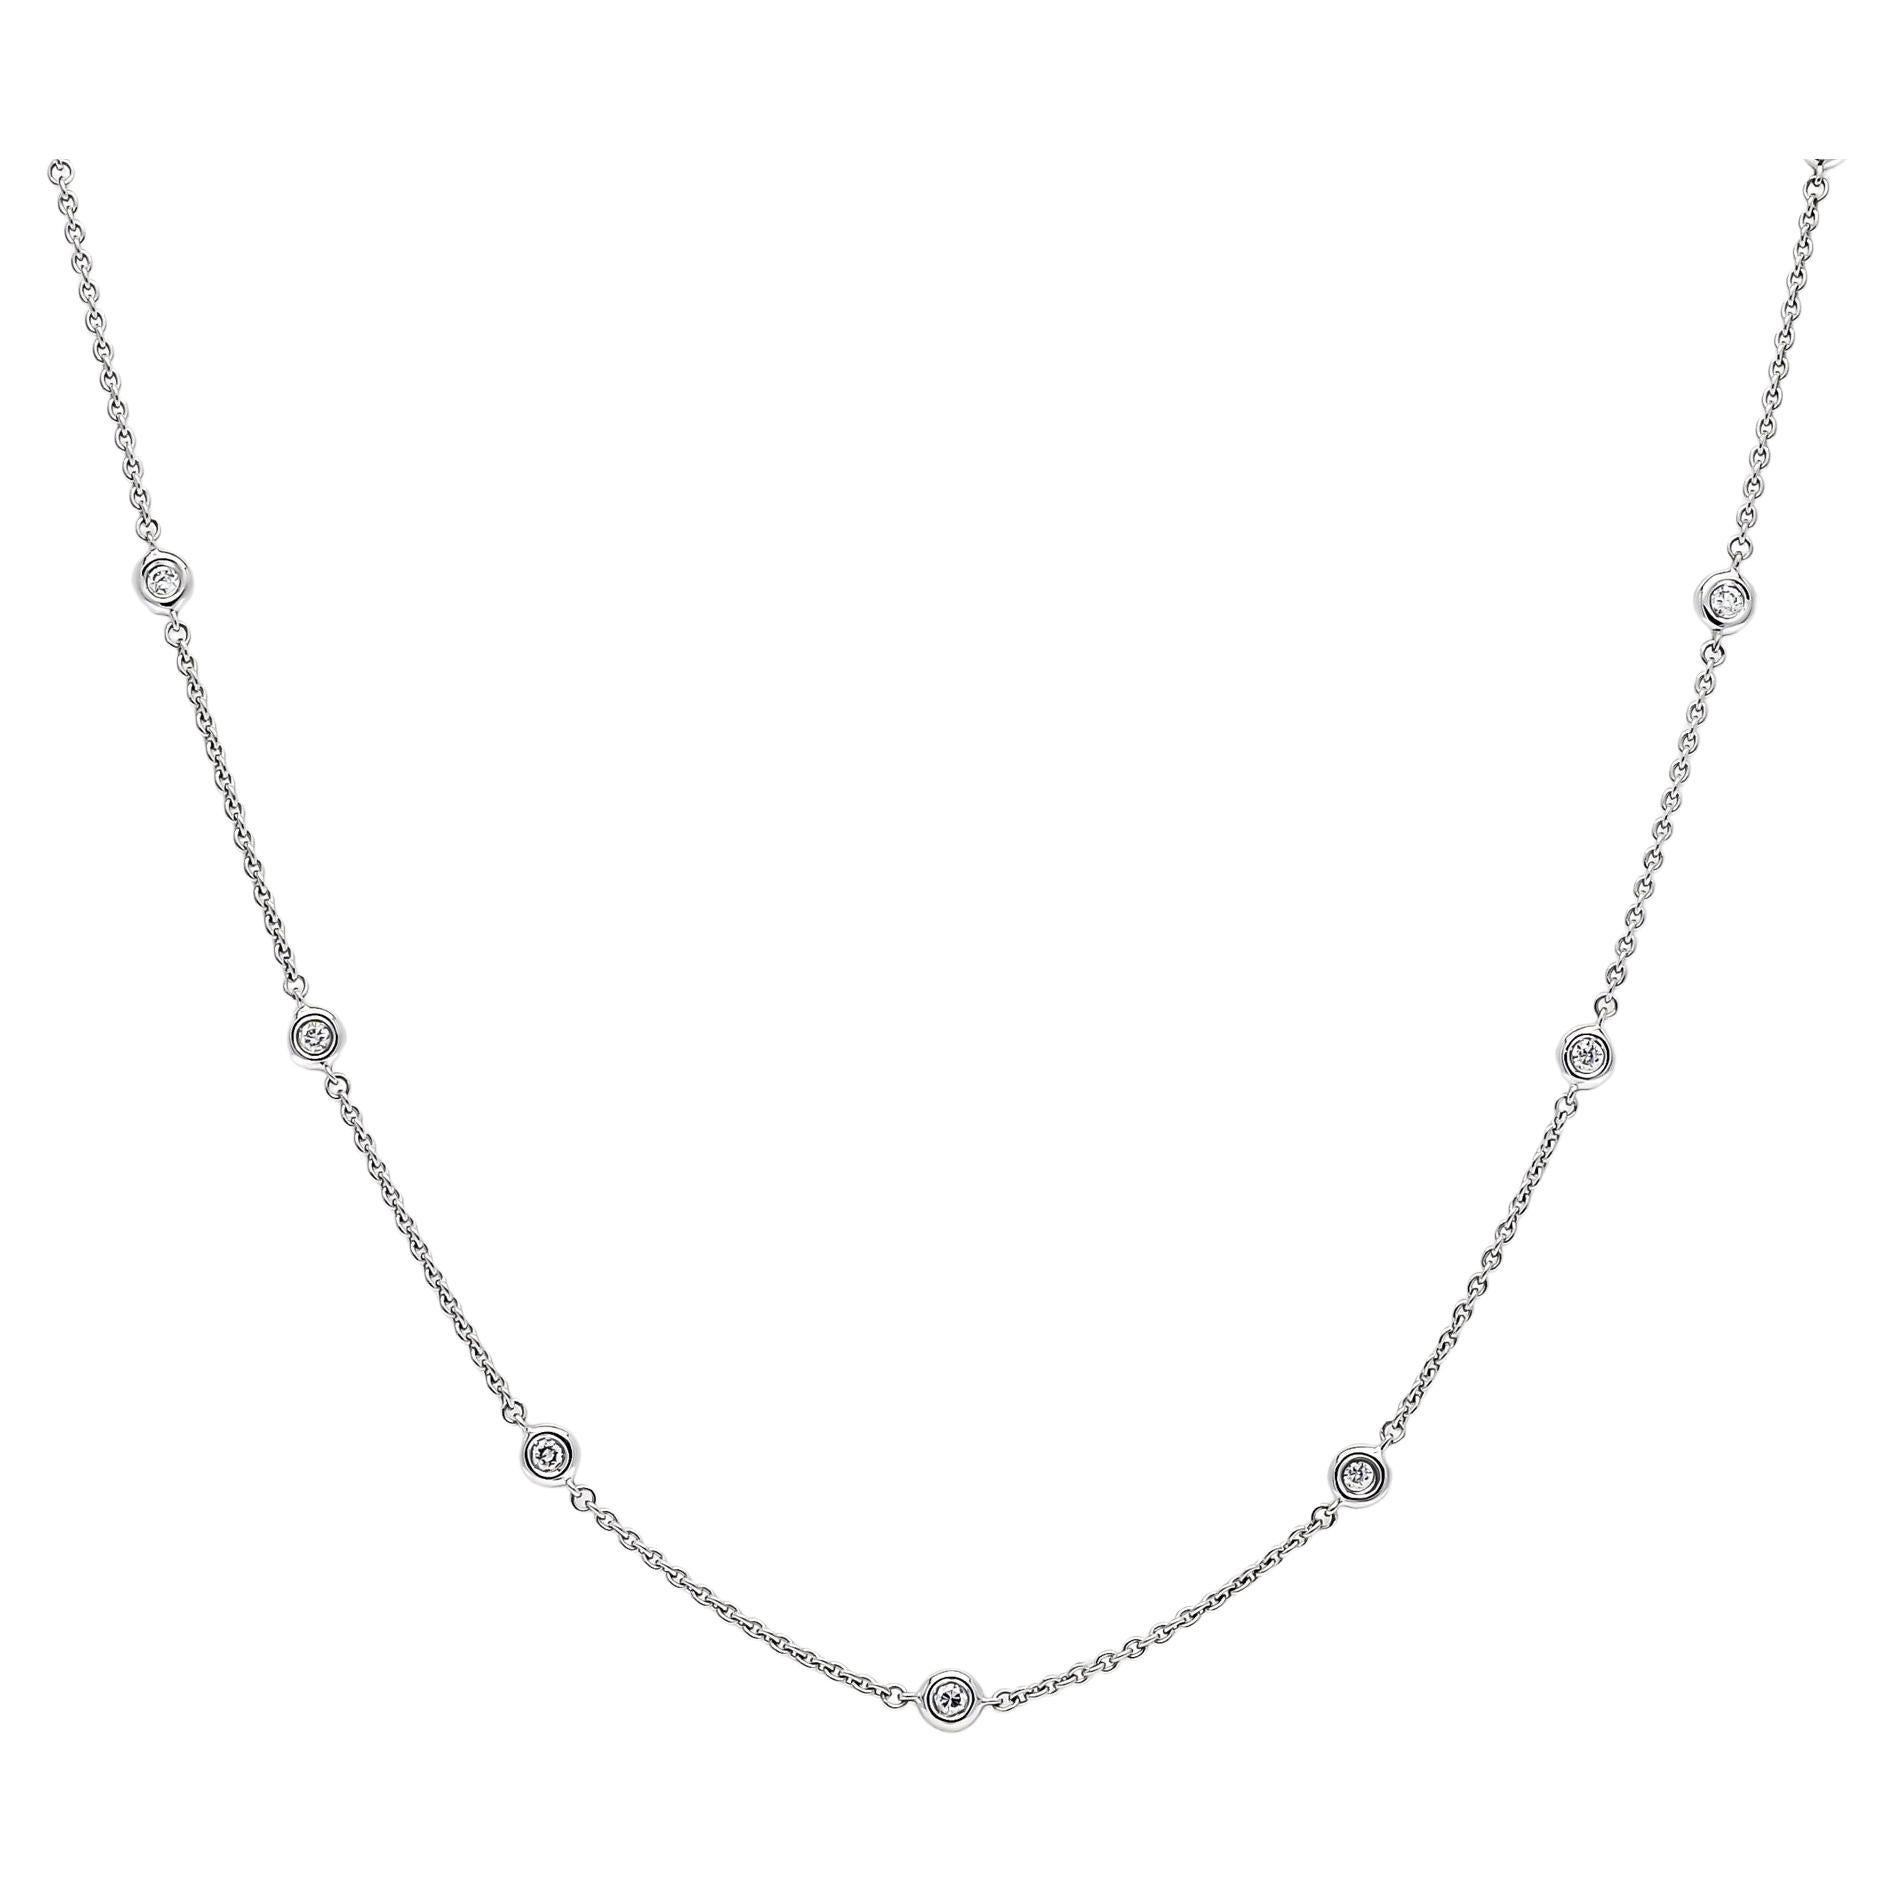 Indulge in the epitome of luxury with our Dazzling Diamond Sparkle, captured with unparalleled elegance and enchantment in an 18 Karat White Gold Bezel Set Chain Necklace. This extraordinary piece showcases a resplendent round-cut diamond, weighing